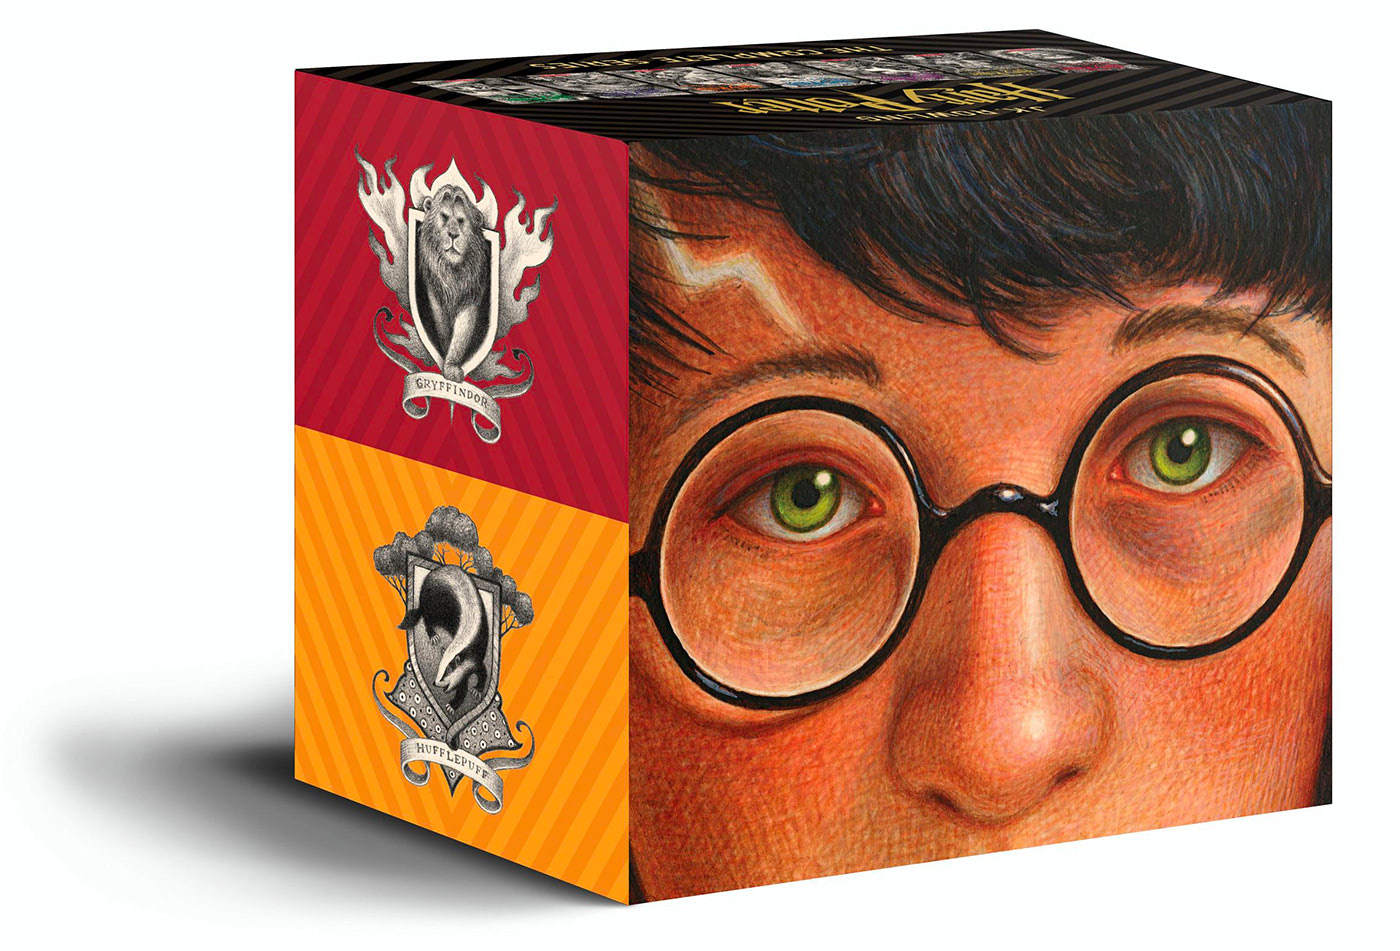 Scholastic ‘Harry Potter’ 20th anniversary edition boxed set